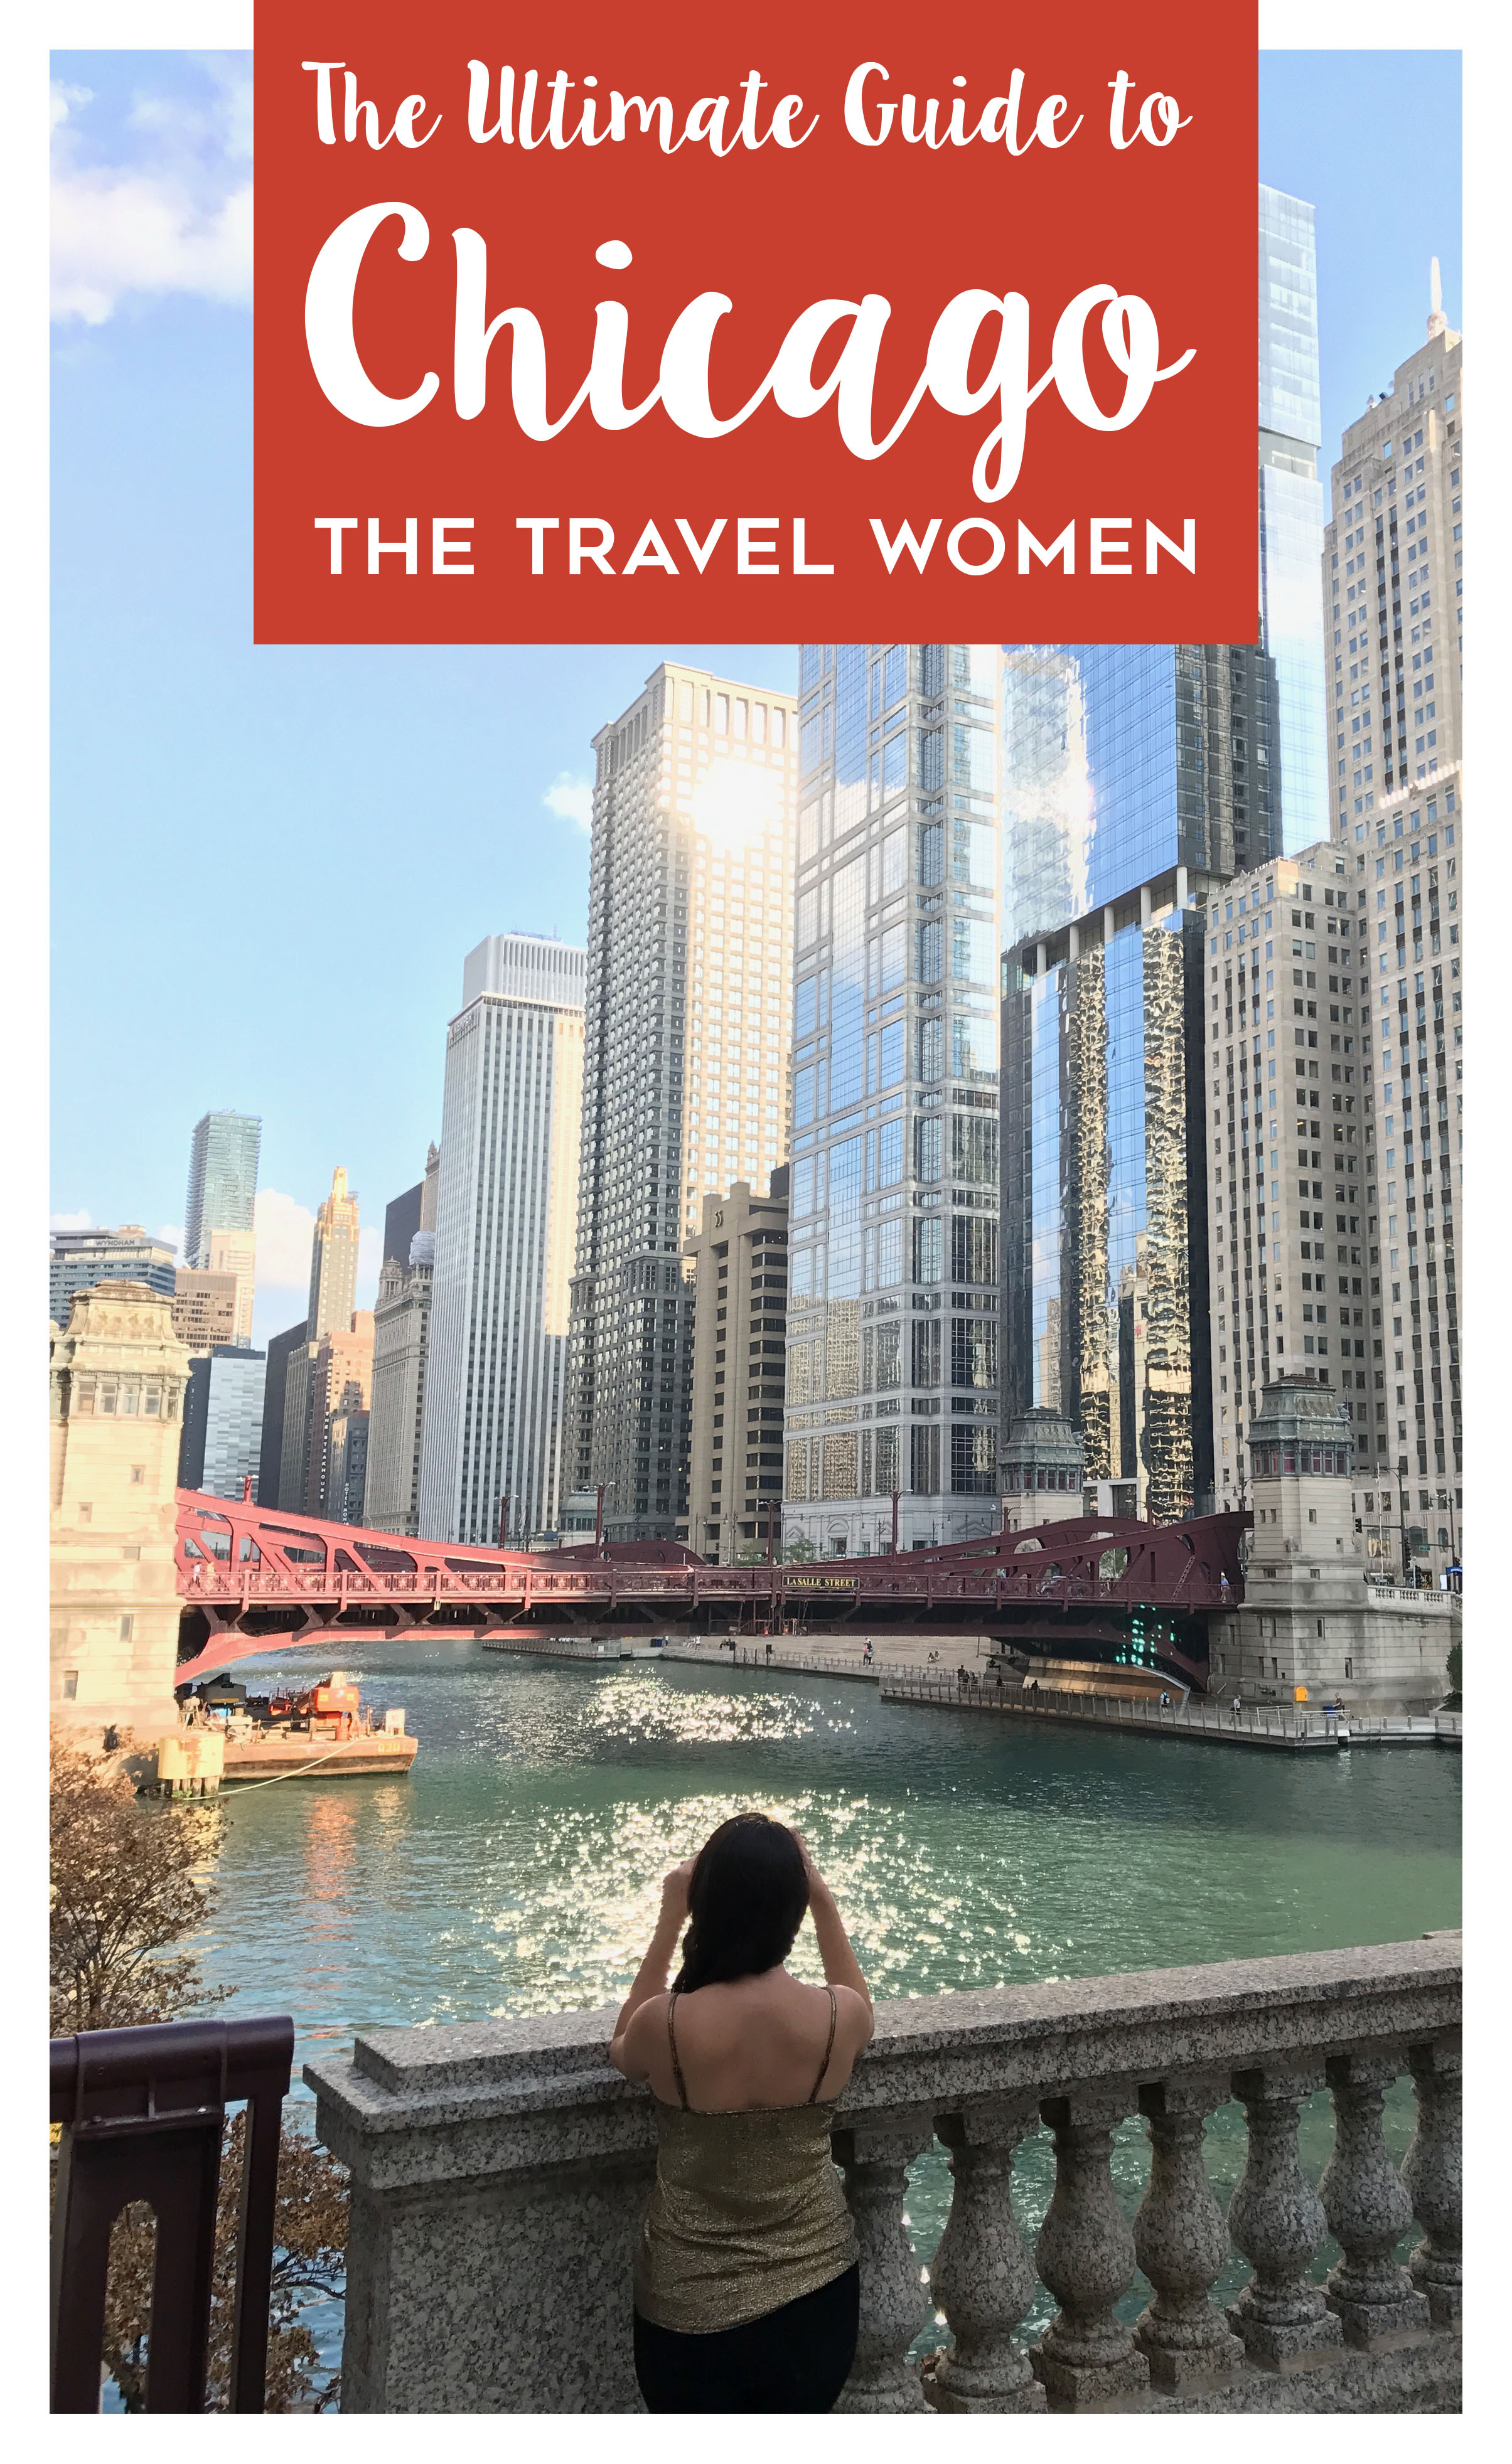 "The Ultimate Guide to Chicago" on top of girl taking photo of the skyline